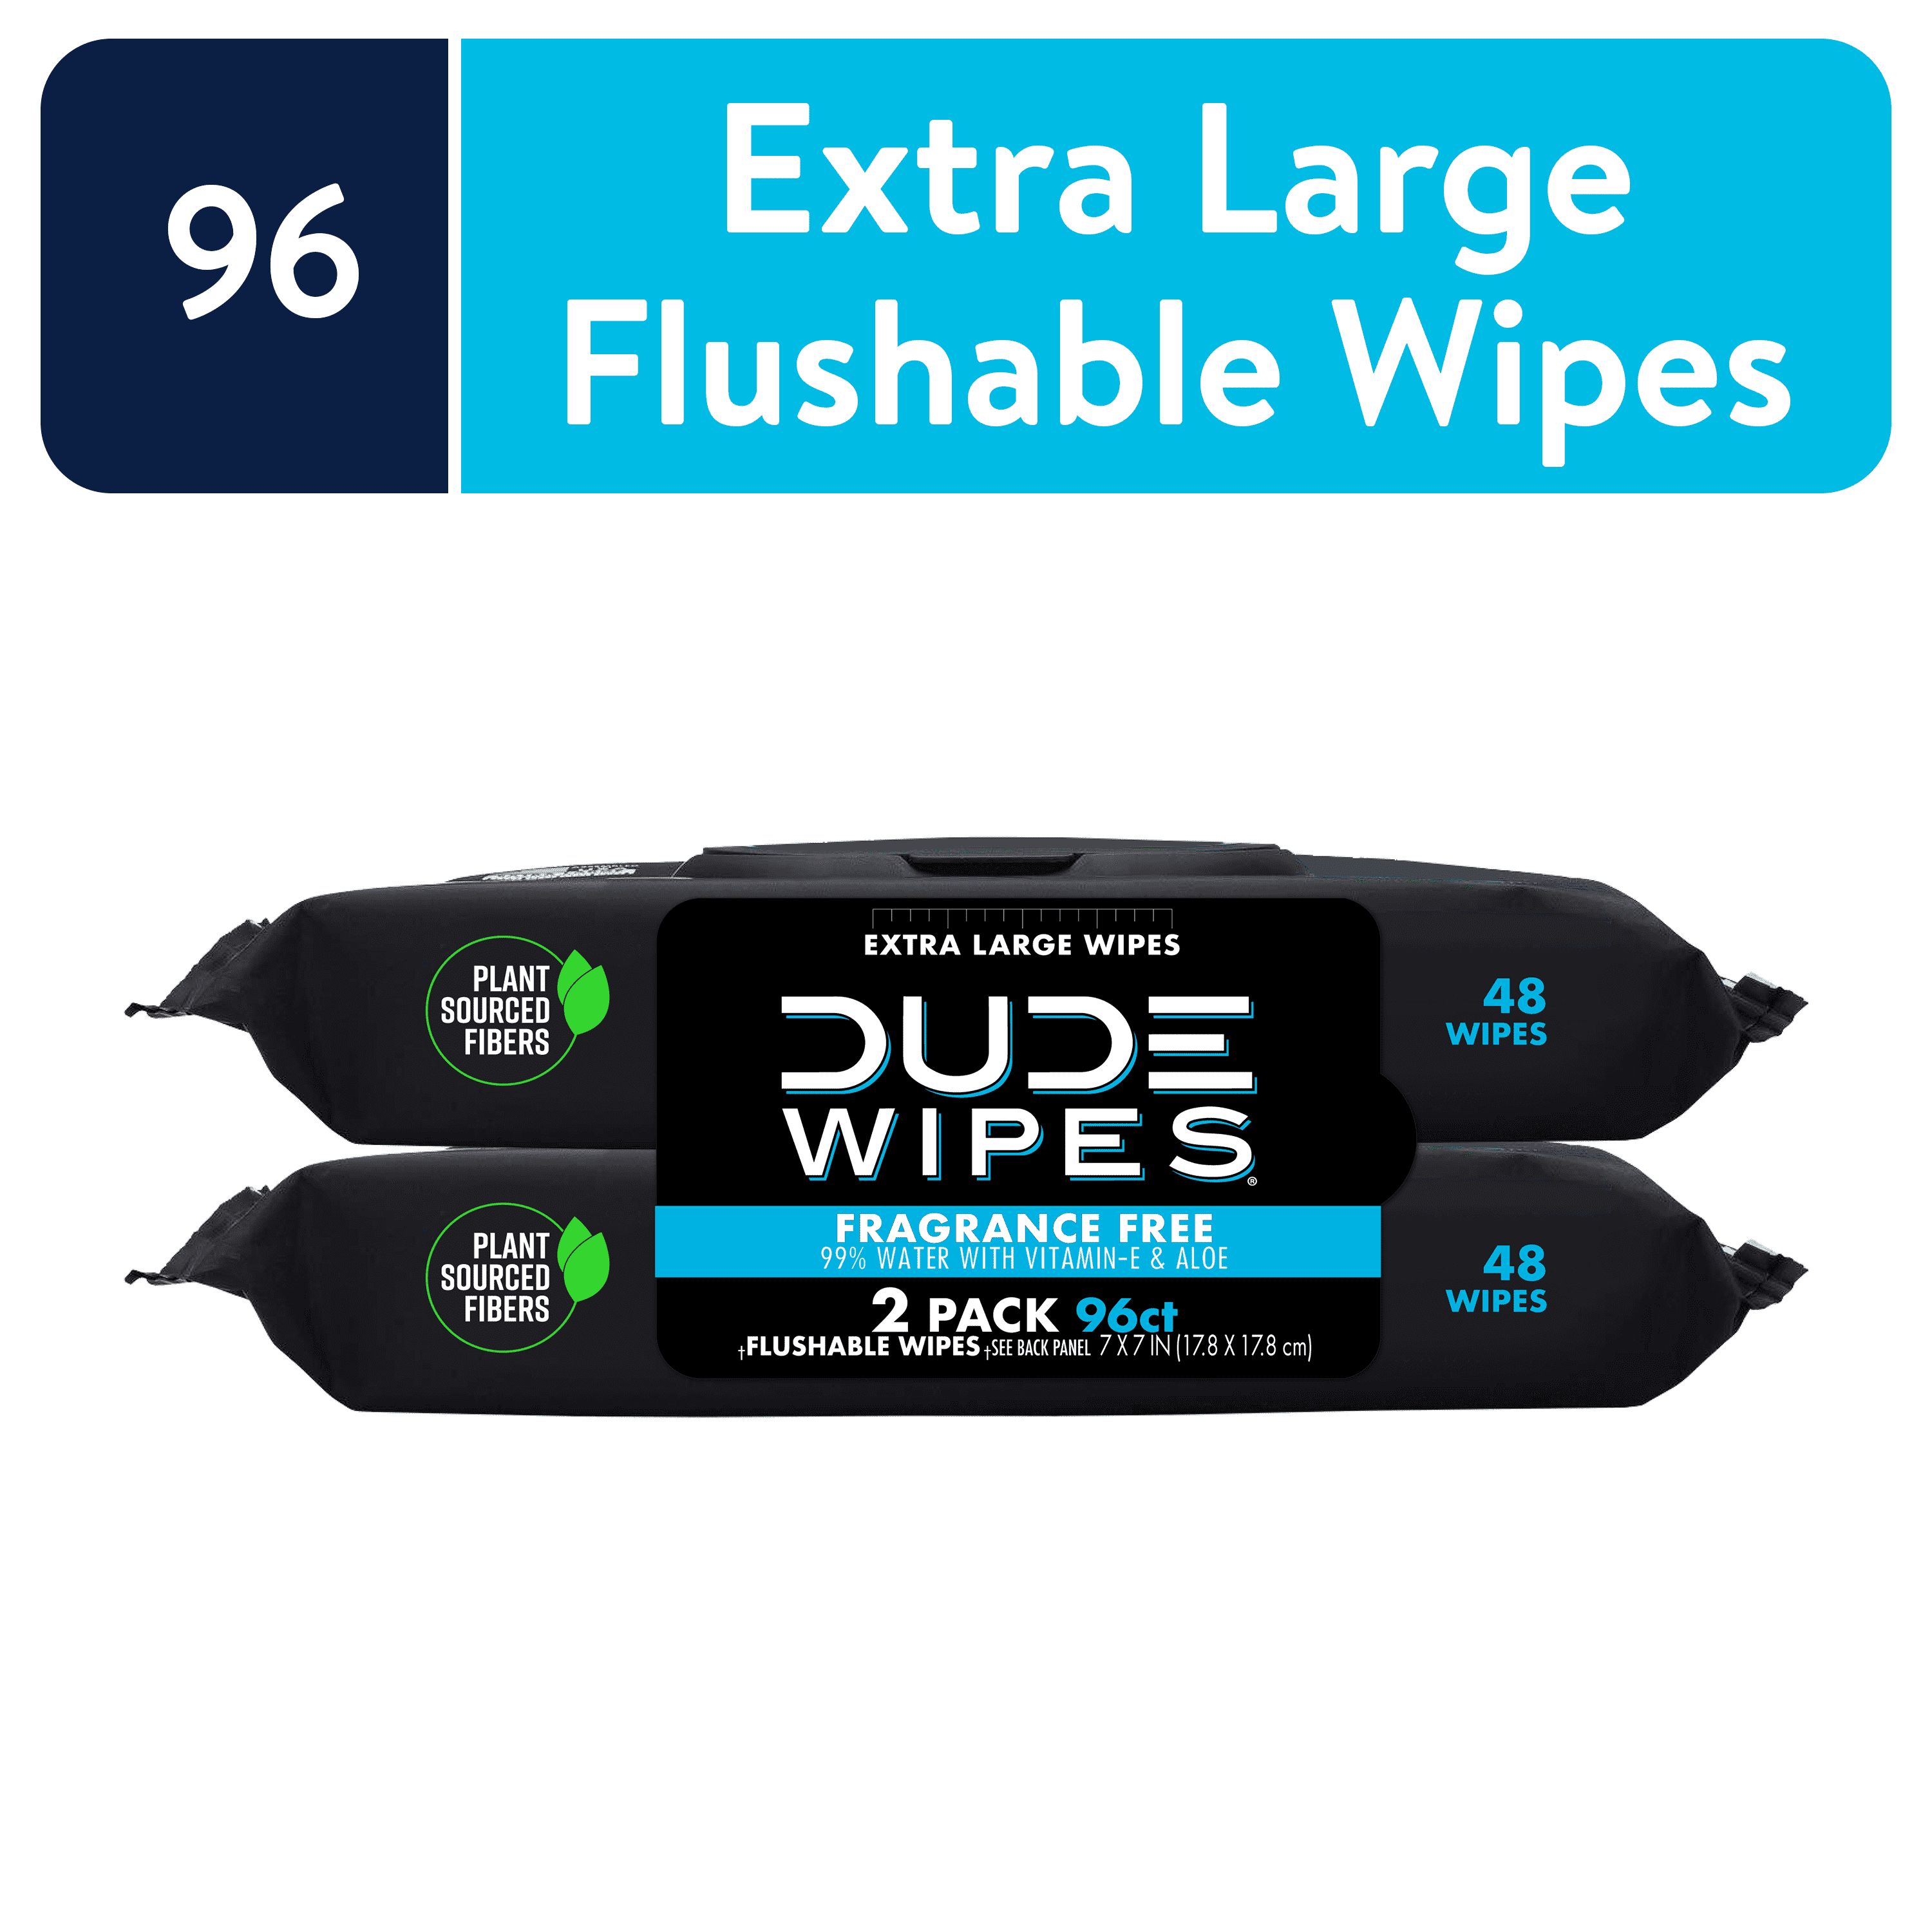 Everything you need to know about DUDE Wipes